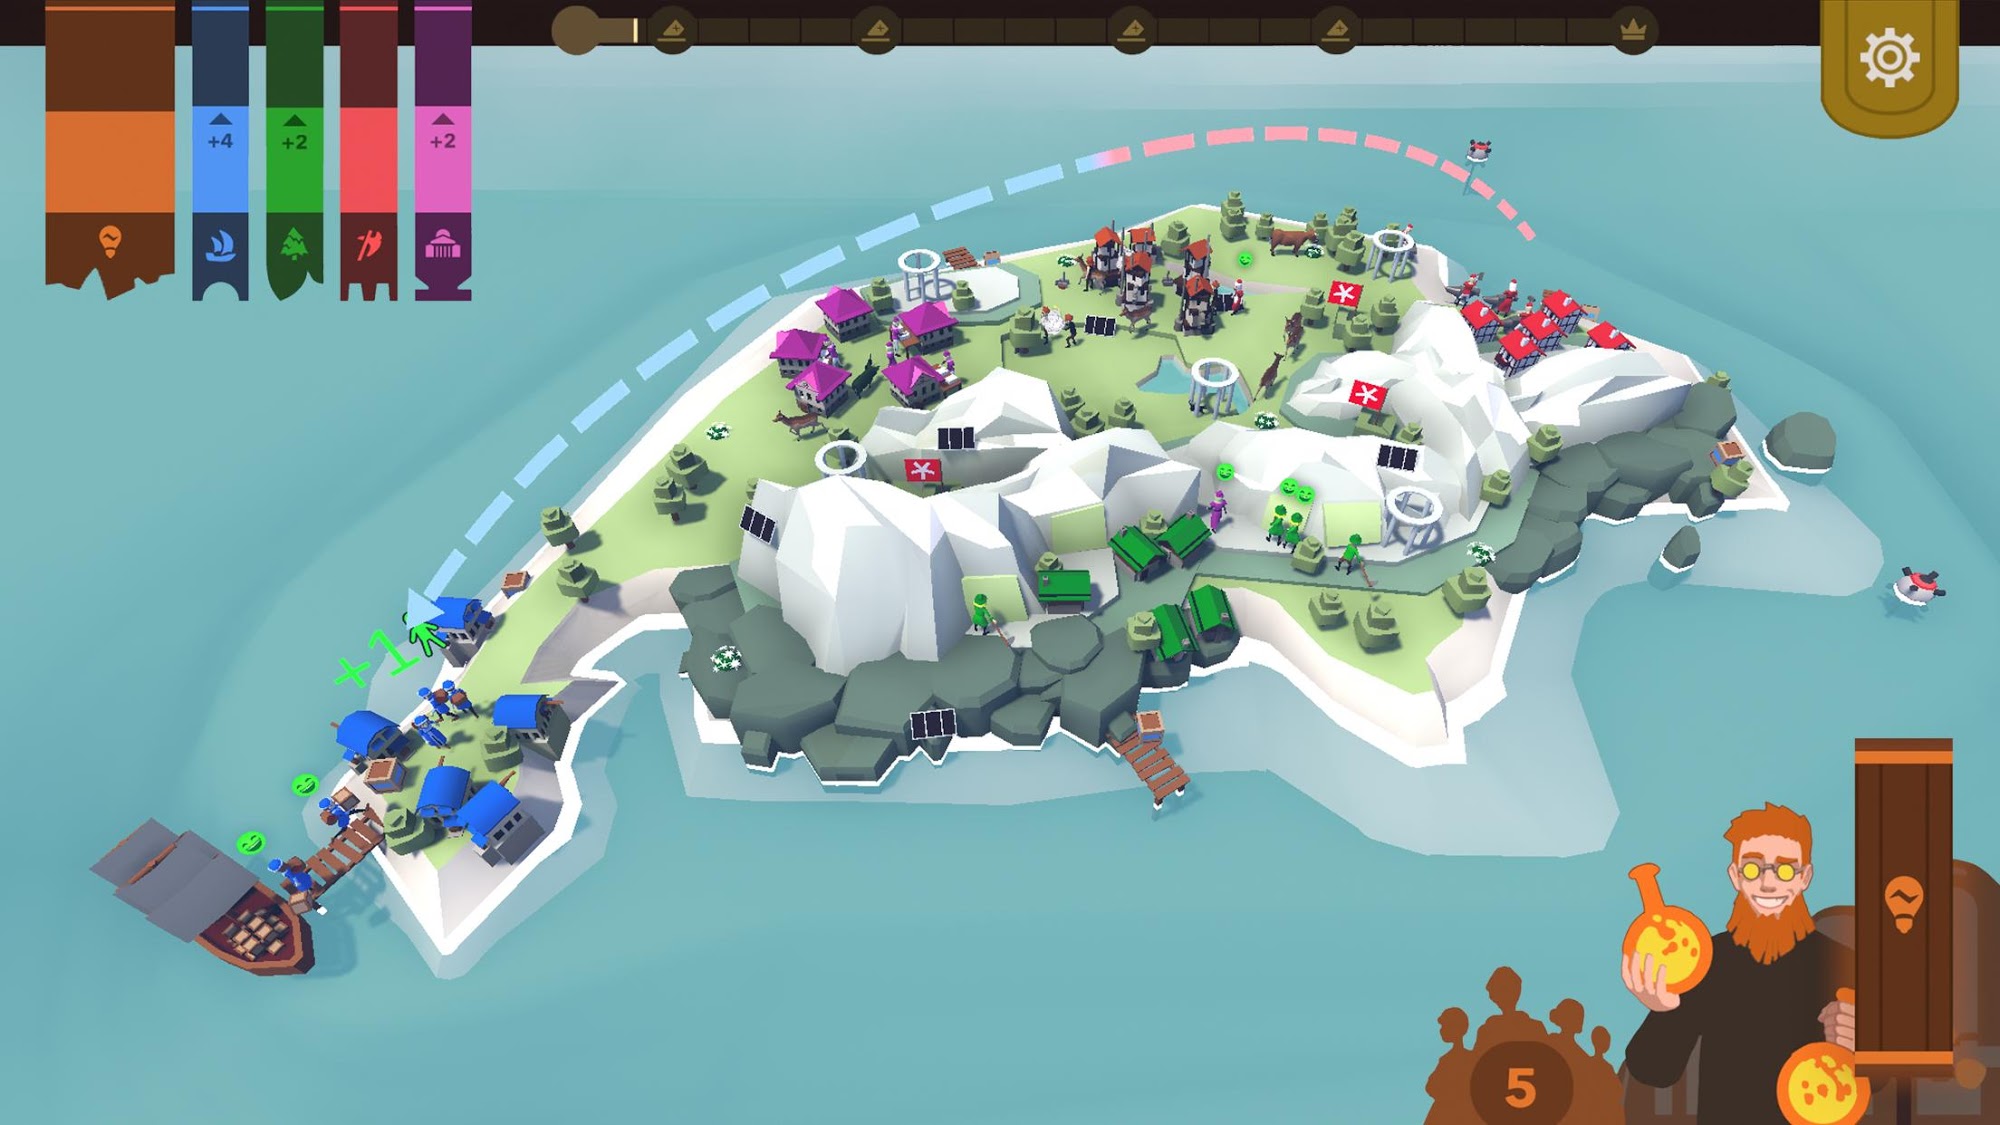 Democratia: The Isle of Five pour Android